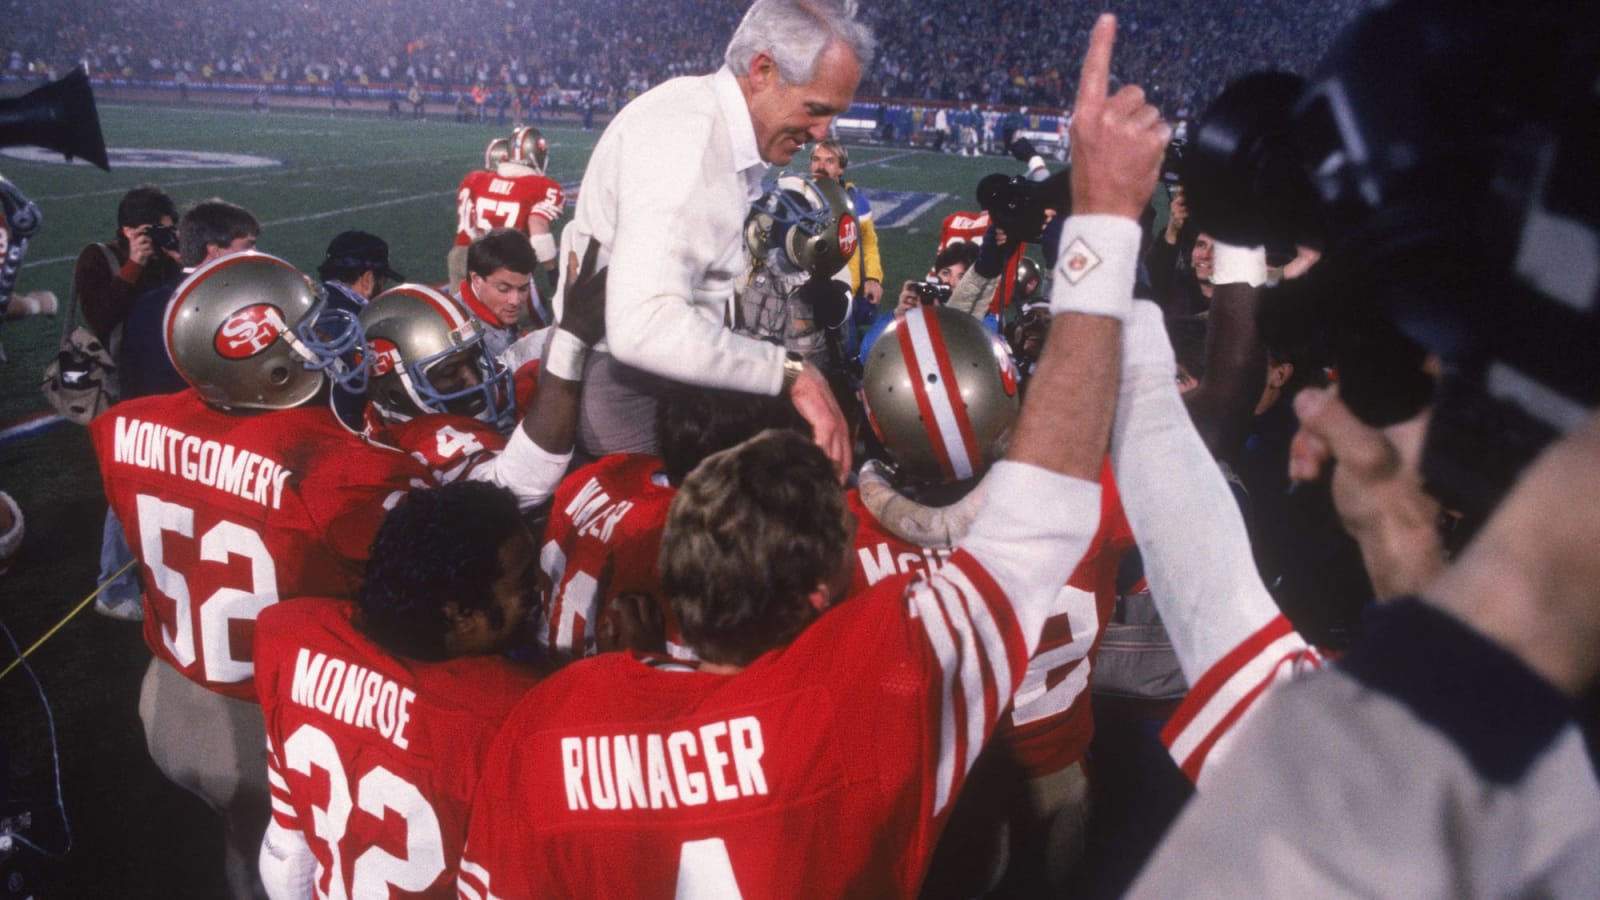 Re-visiting Super Bowl XVI 40 years later